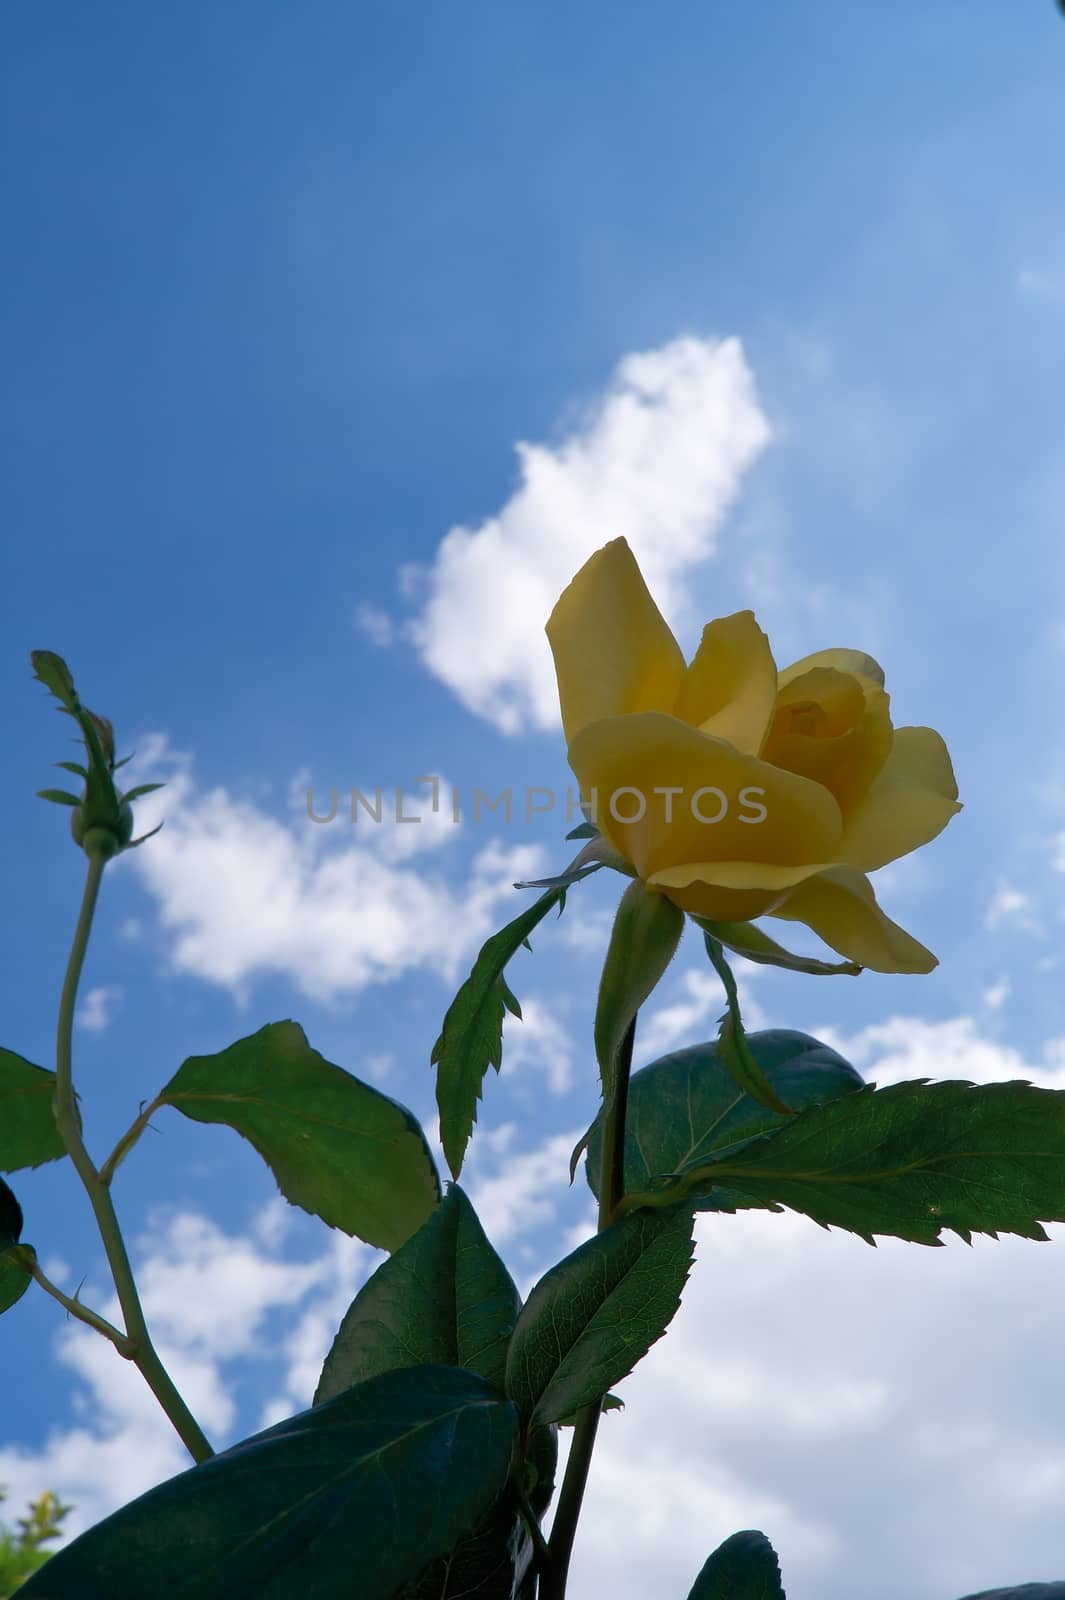 Yellow roses in front of a blue and clouds.